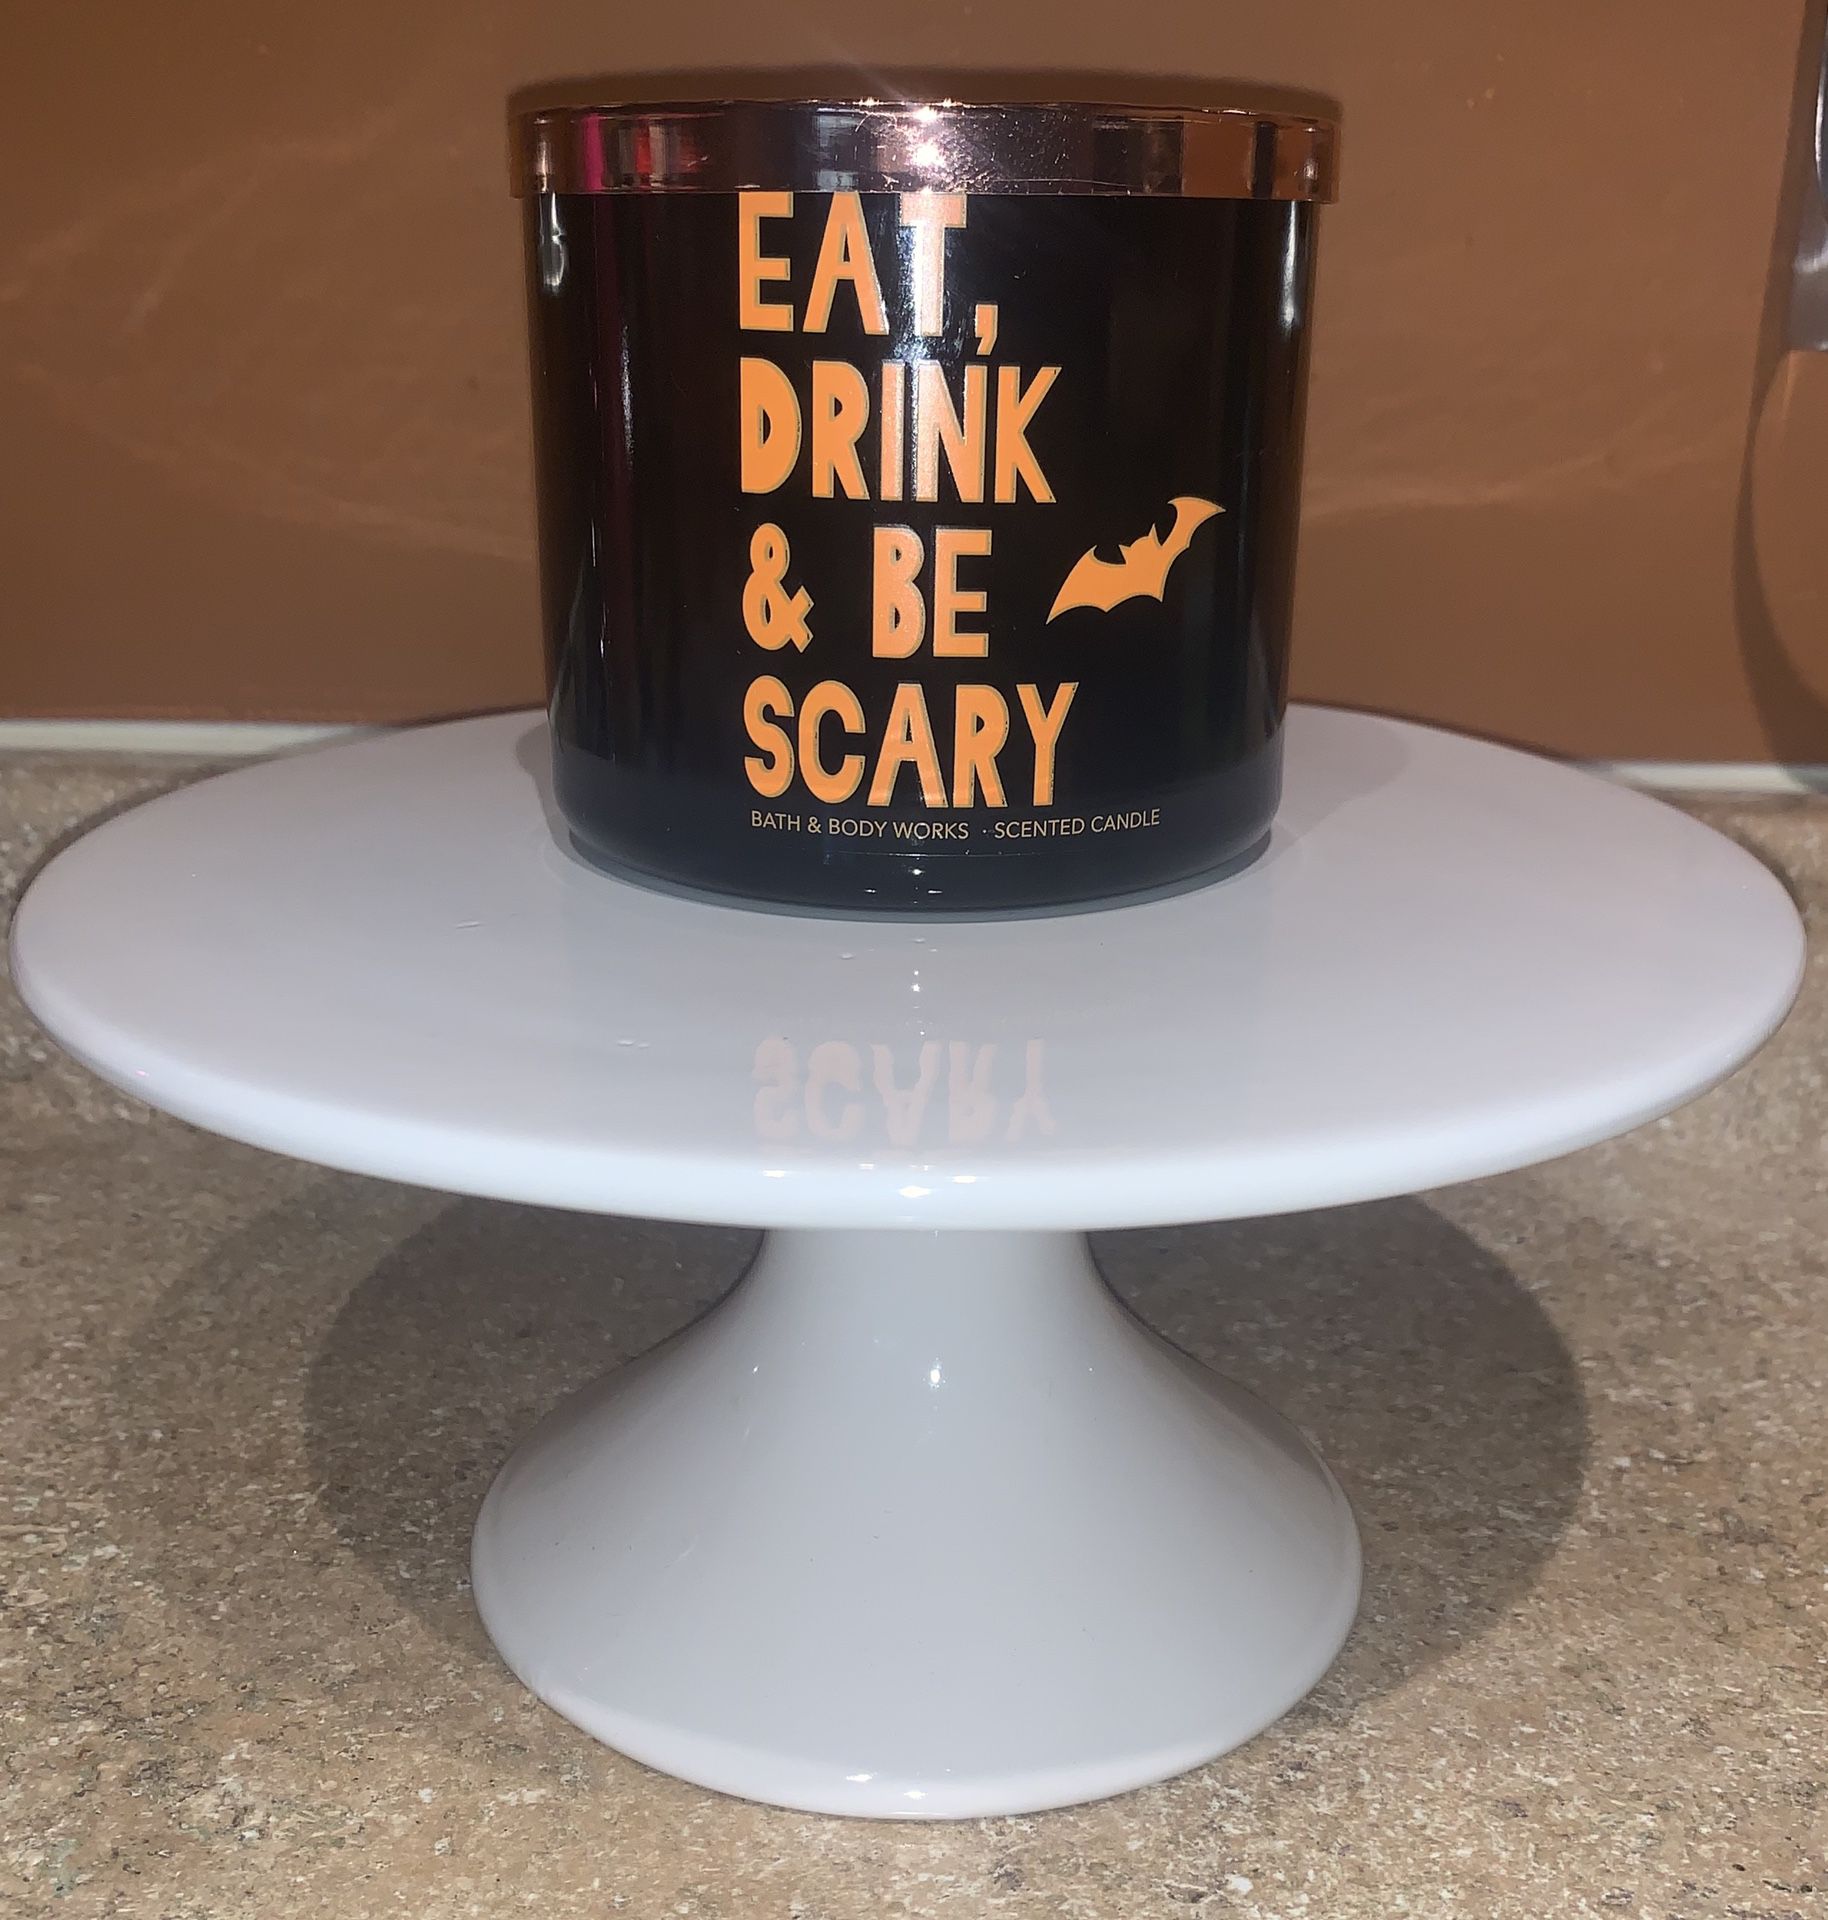 Eat, drink & be scary